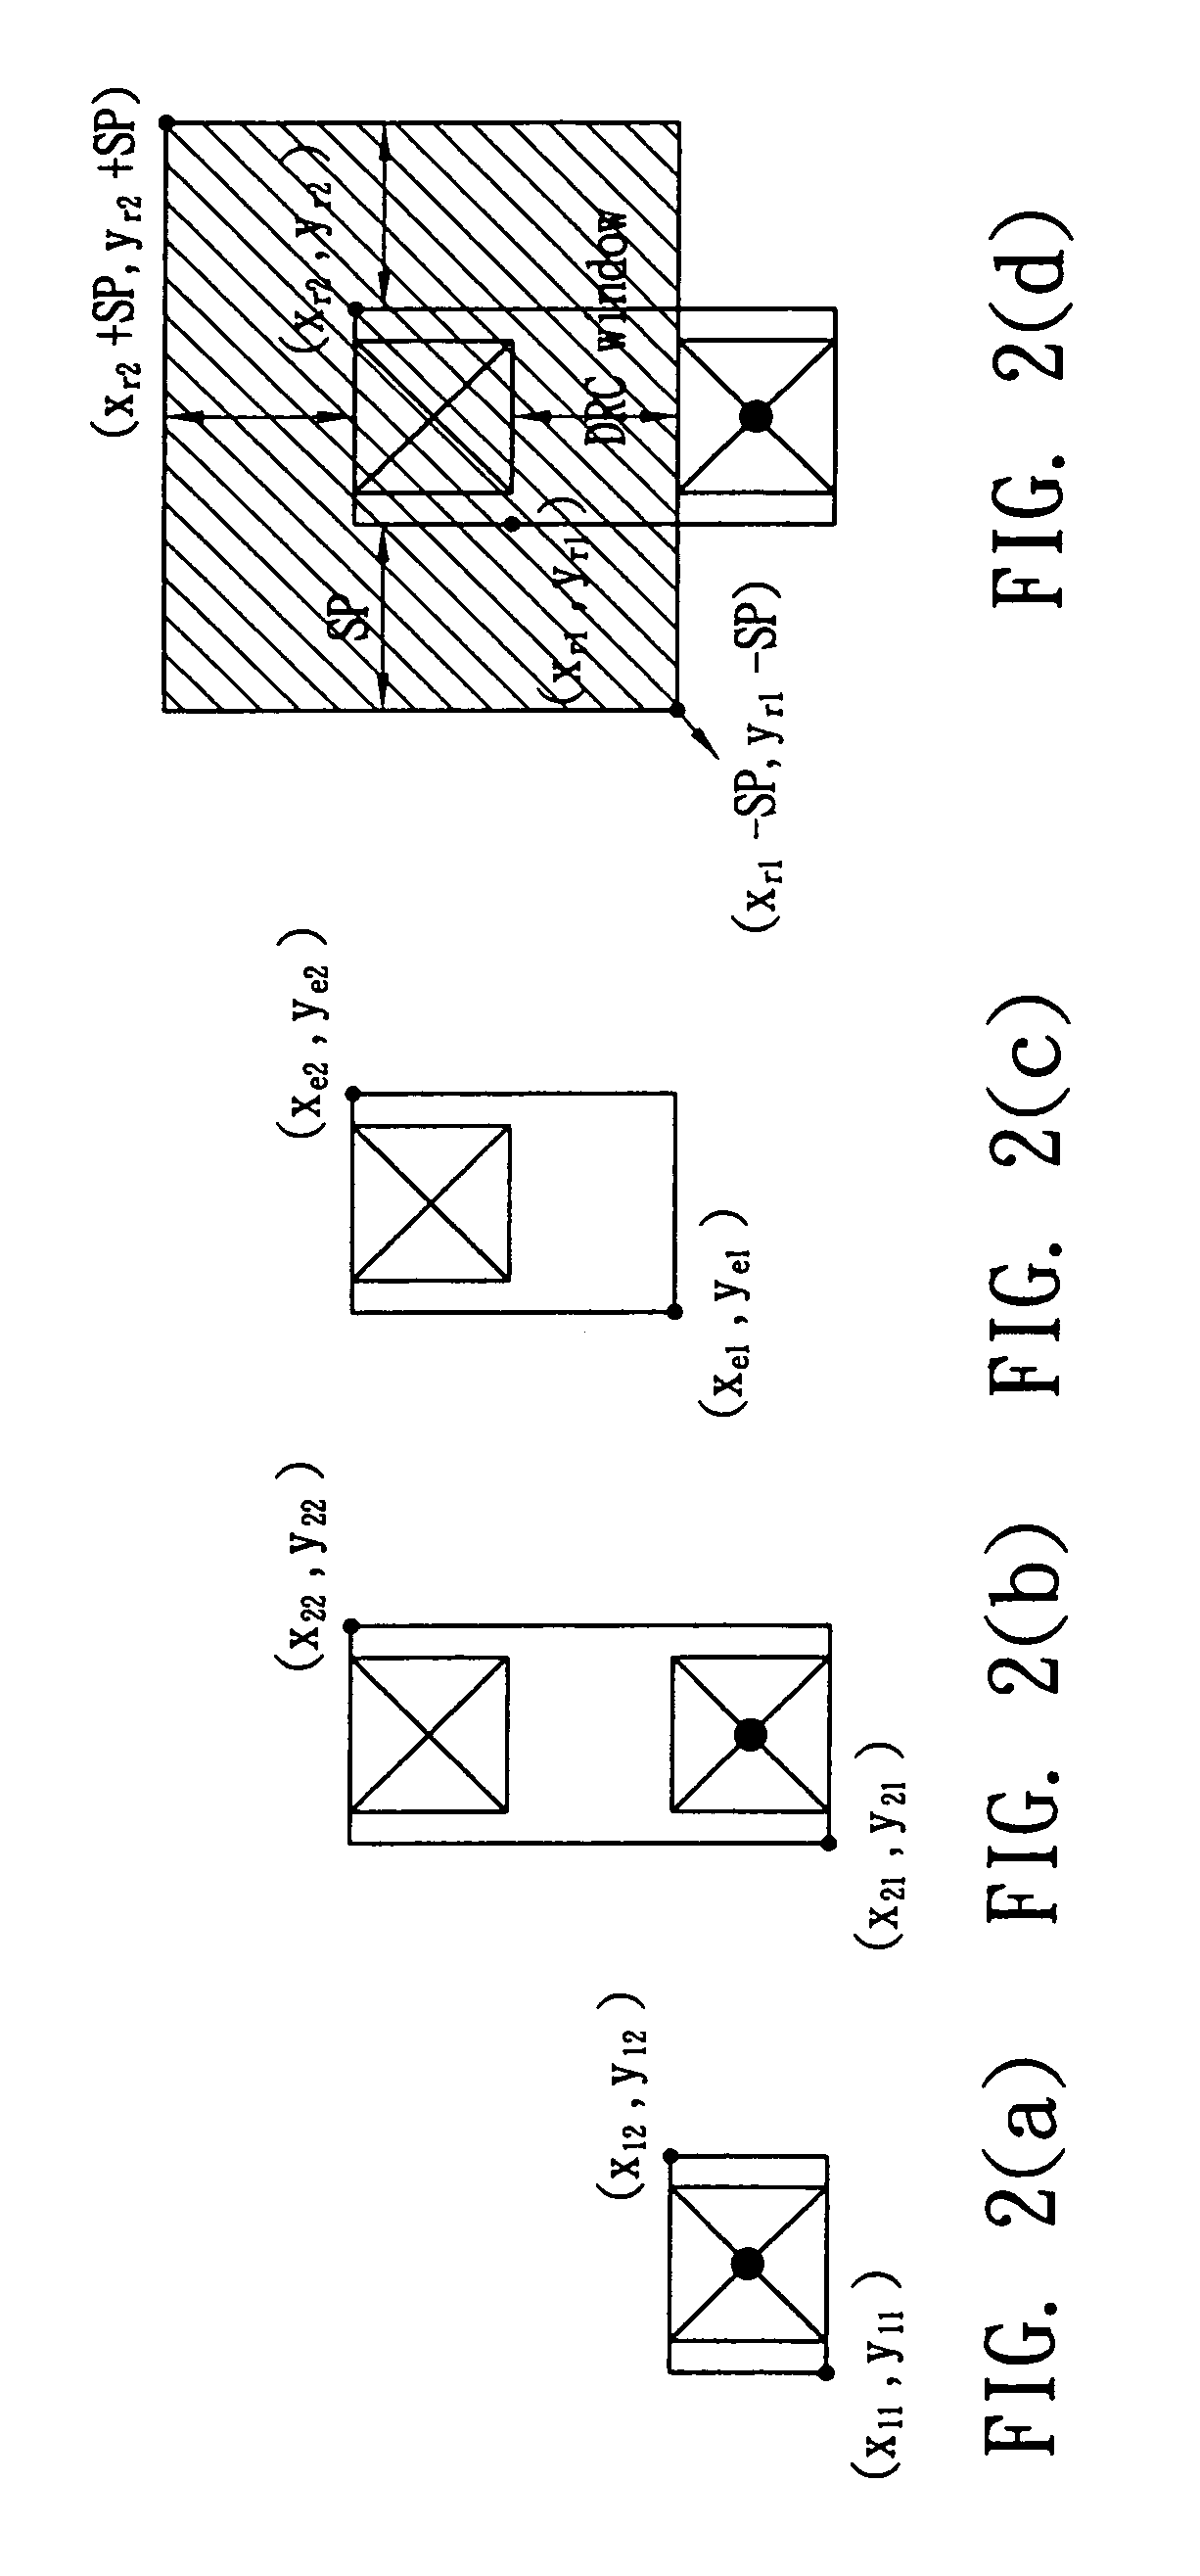 Method for post-routing redundant via insertion in integrated circuit layout